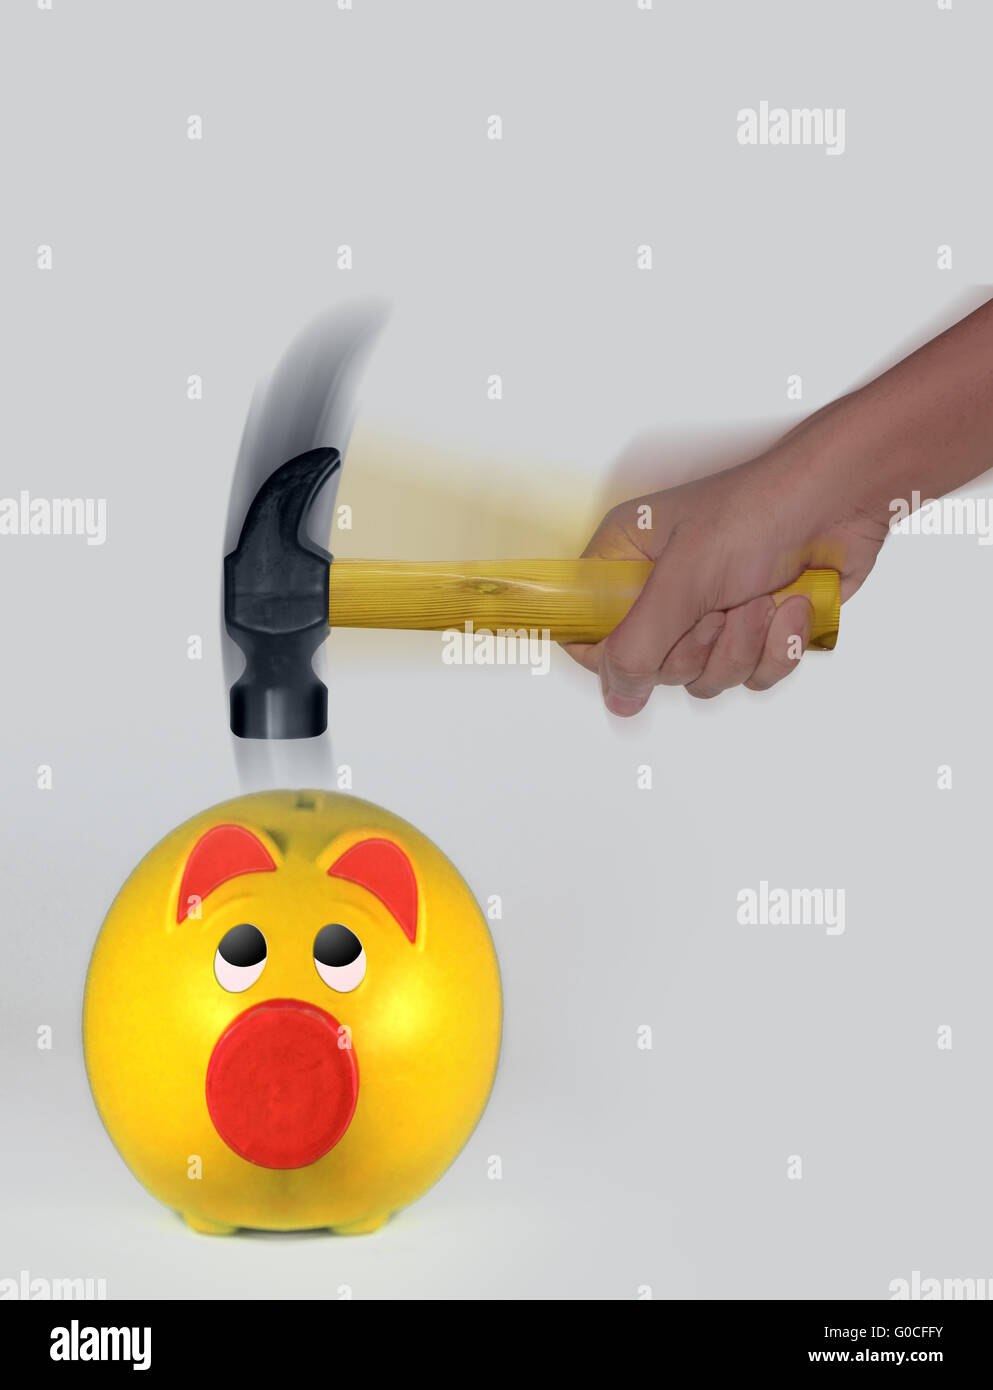 Hammer hitting a Piggy Bank, with motion blur Stock Photo